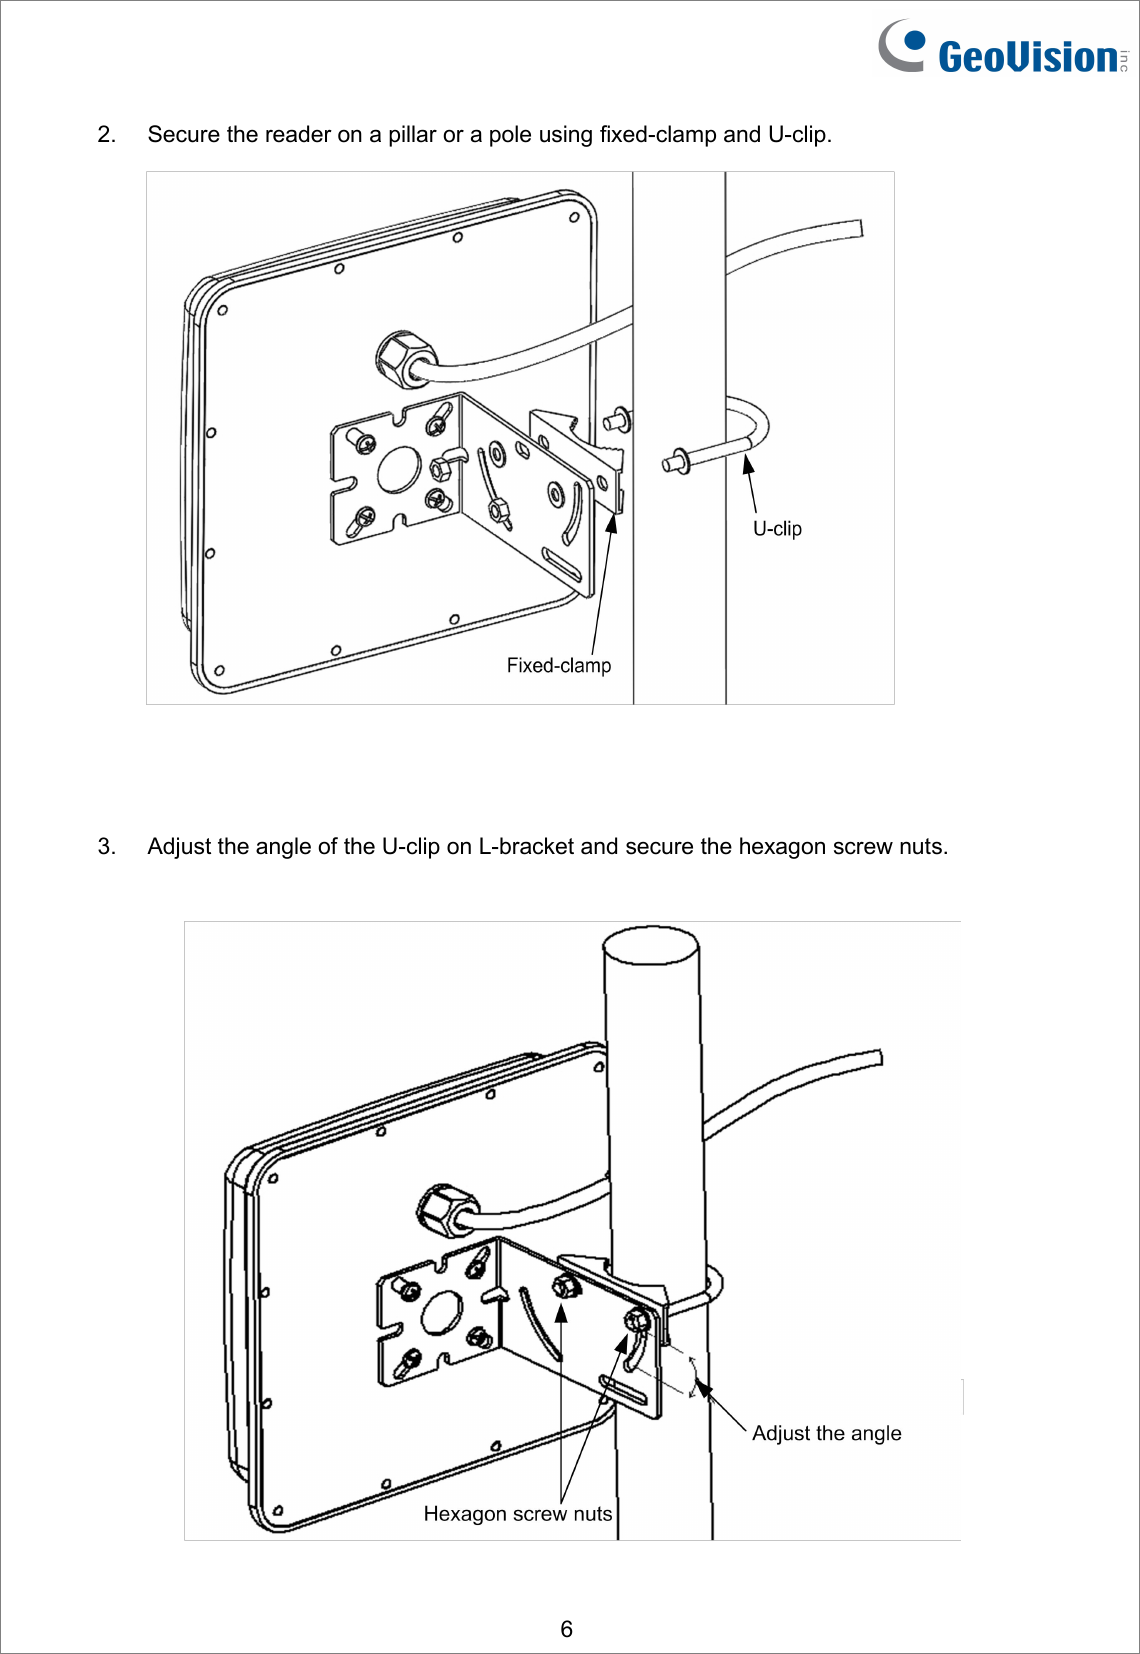 62. Secure the reader on a pillar or a pole using fixed-clamp and U-clip.3. Adjust the angle of the U-clip on L-bracket and secure the hexagon screw nuts.